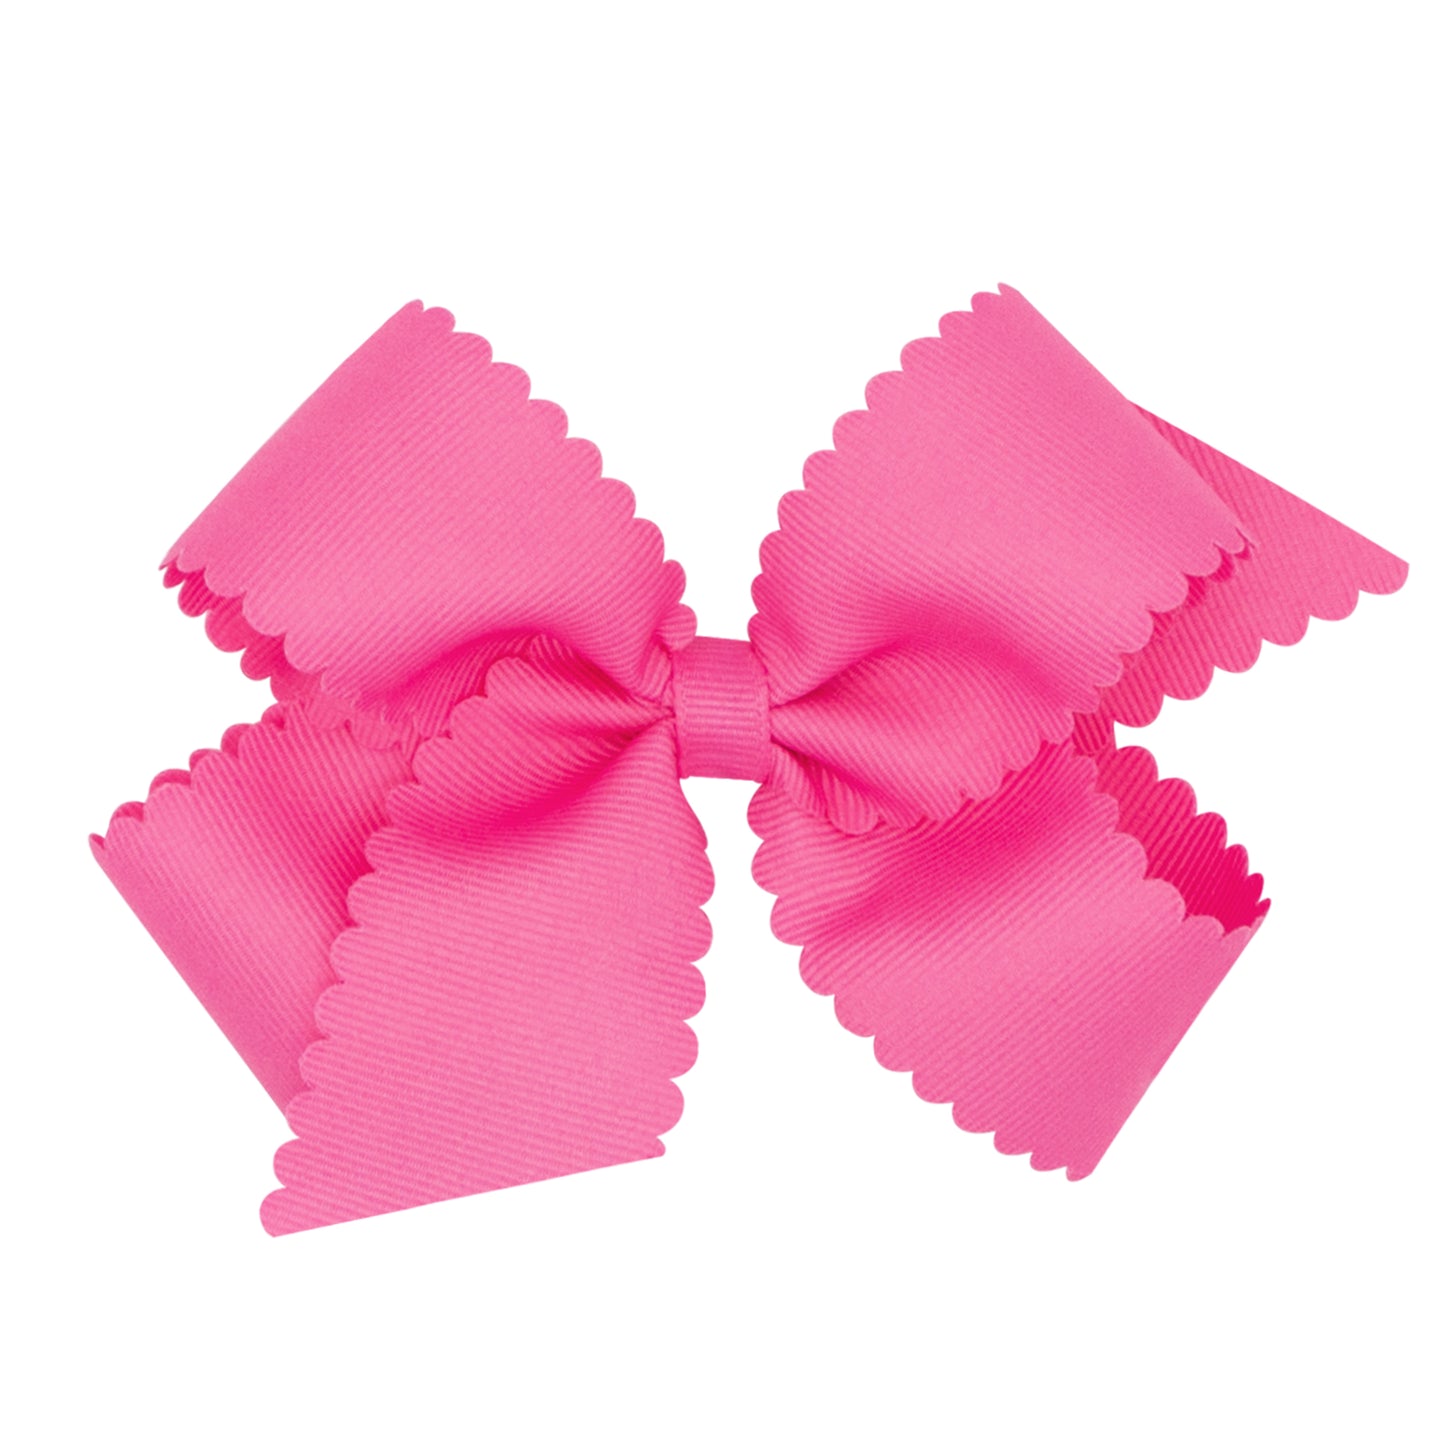 Medium Scalloped Edge Grosgrain Bow - Hot Pink Accessories Wee Ones   